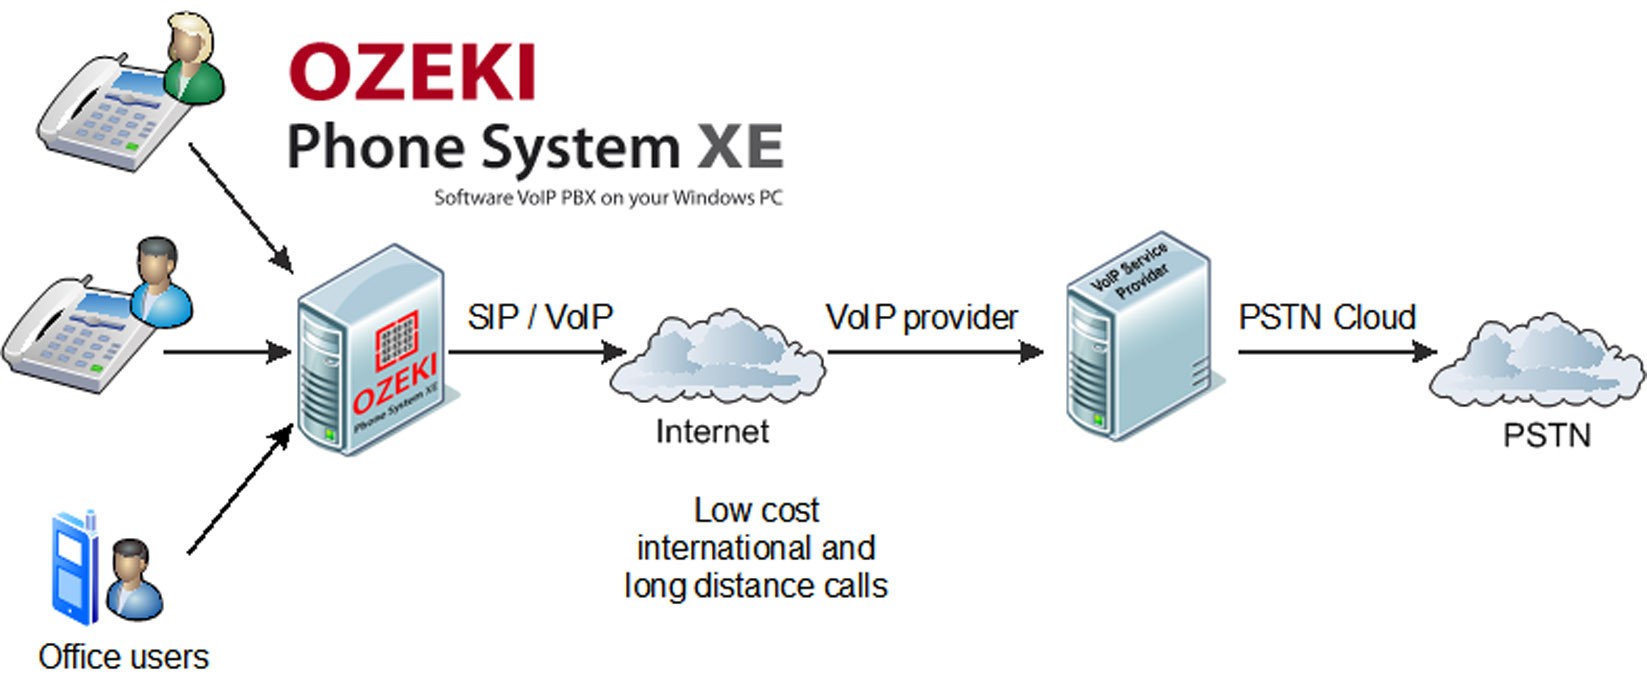 Ozeki VoIP PBX How to connect VoIP telephone networks to Ozeki Phone System XE